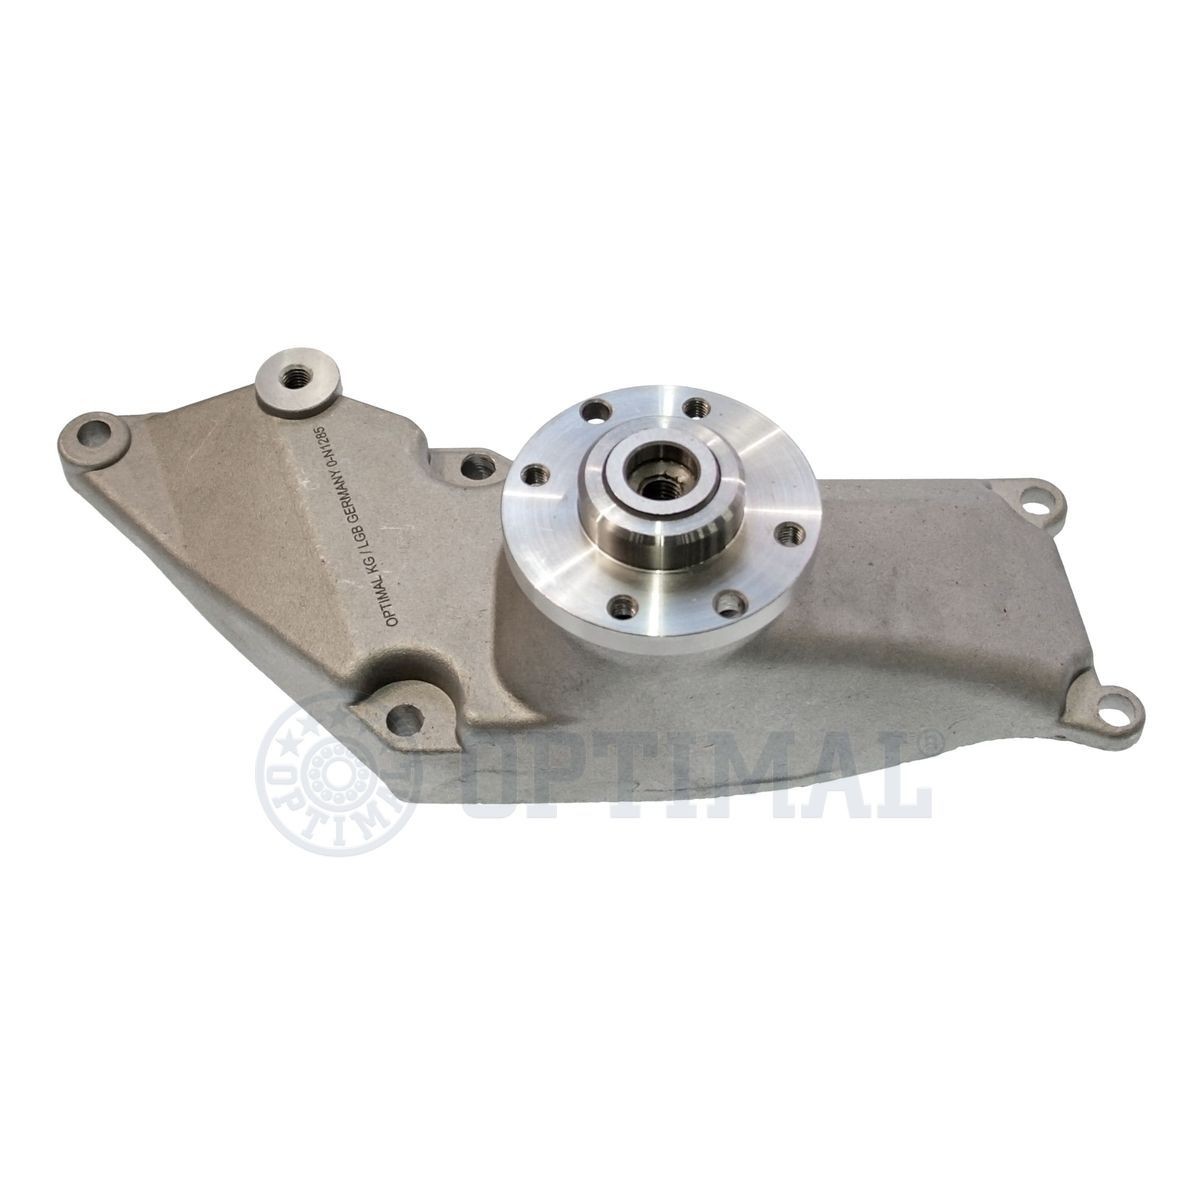 OPTIMAL Bearing, radiator fan shaft 0-N1285 suitable for MERCEDES-BENZ SL, S-Class